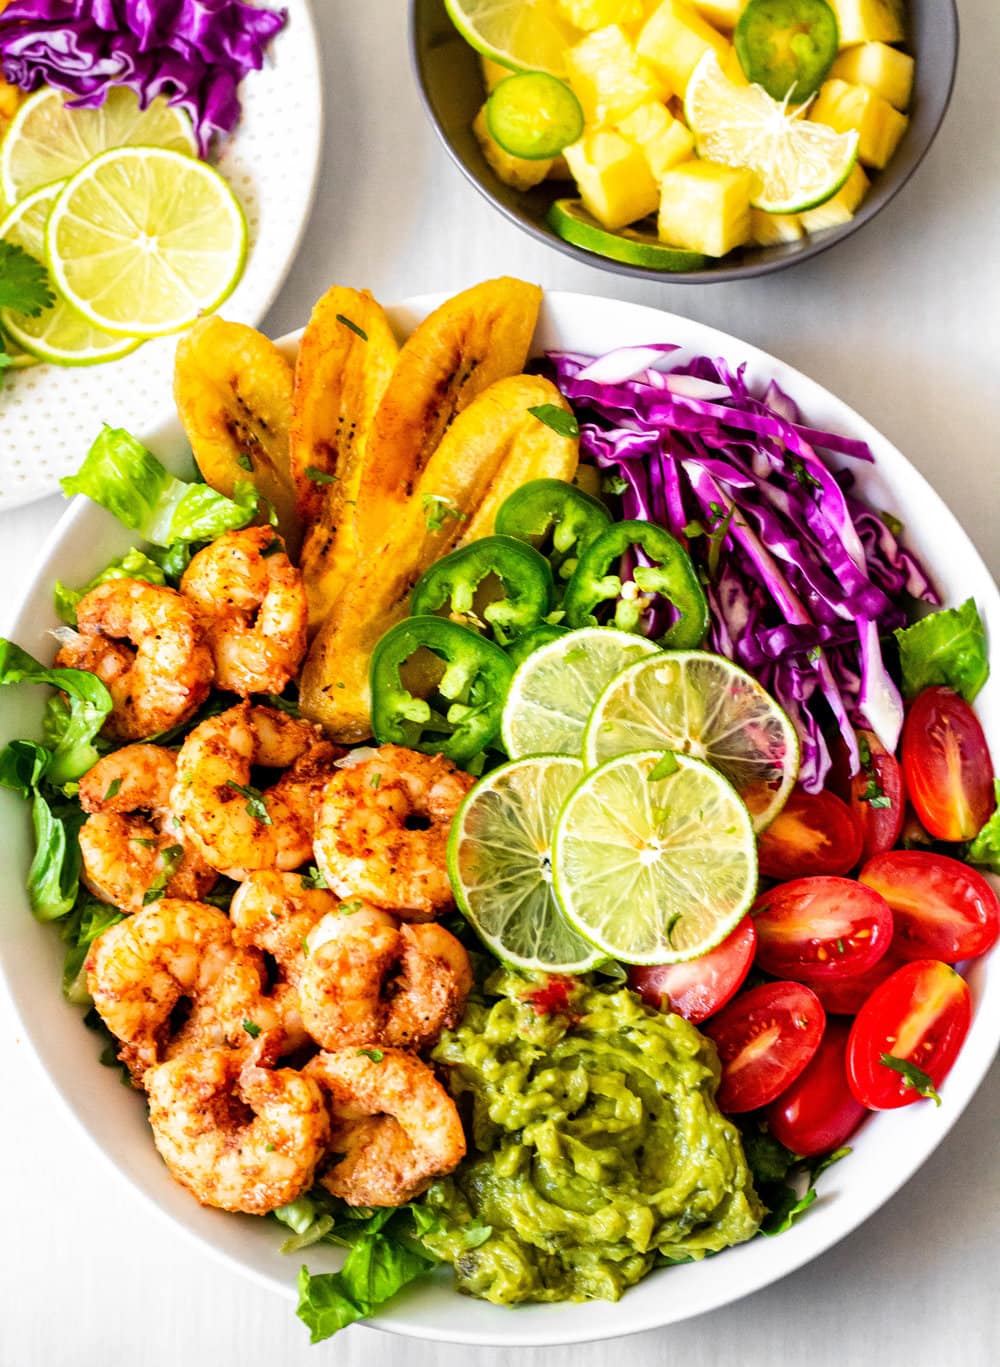 Chili Lime Shrimp Salad with Sweet & Spicy Guacamole - All the Healthy Things